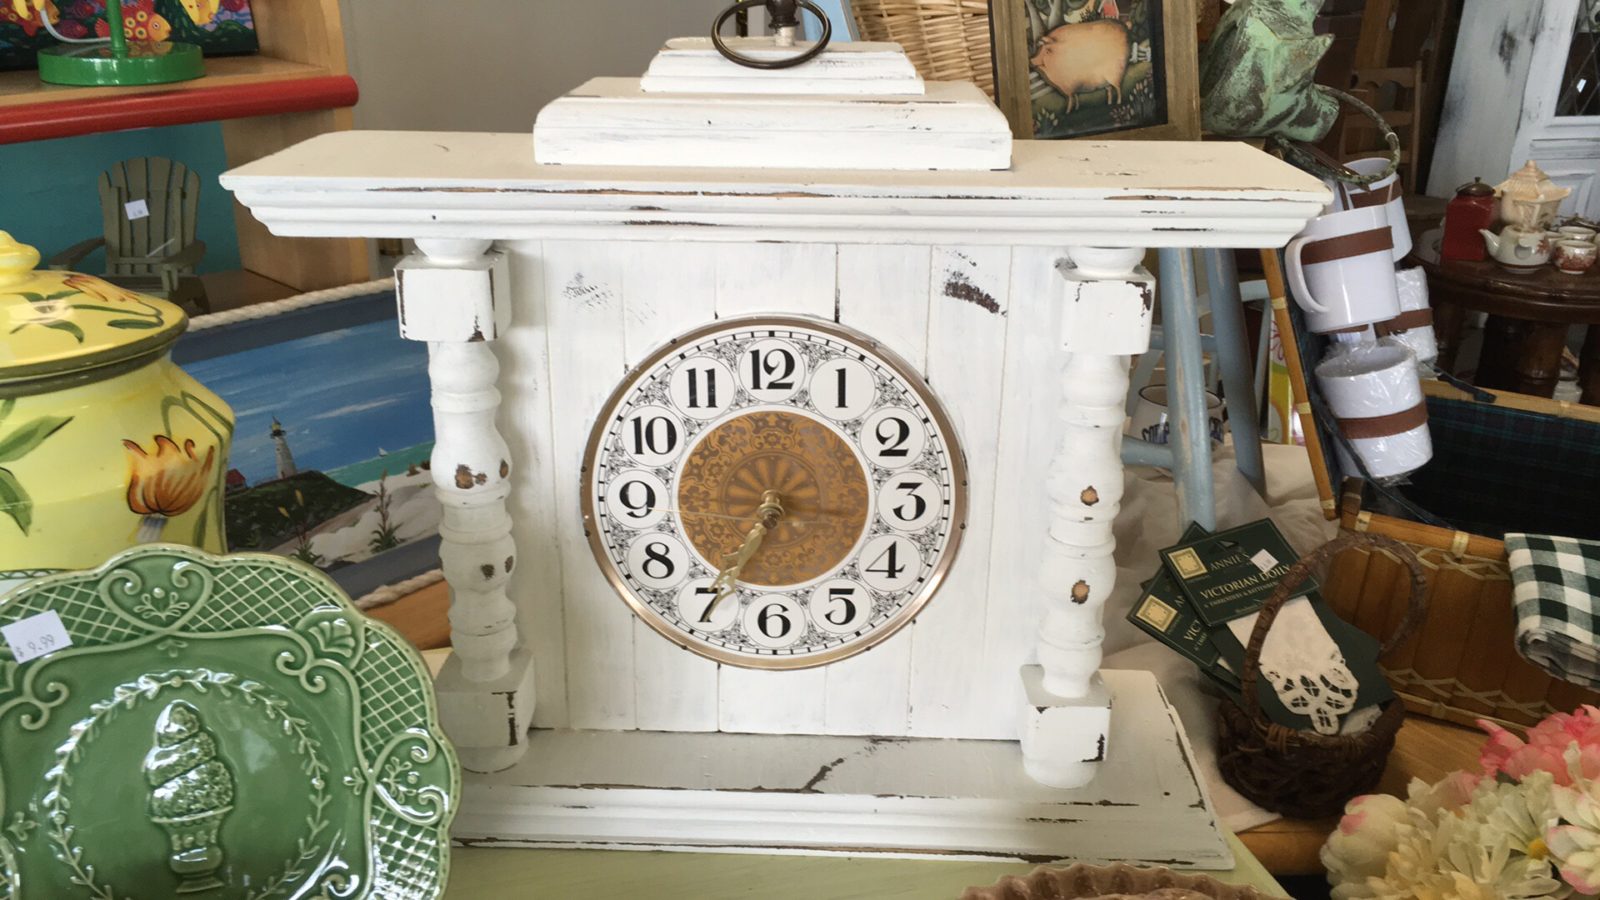 Vintage Shabby Chic Mantle Clock • Very charming and unique Table or Mantle Clock appears to be hand made. Chalk painted white and distressed it features turned columns and s gold & white Clock face. Battery operated.